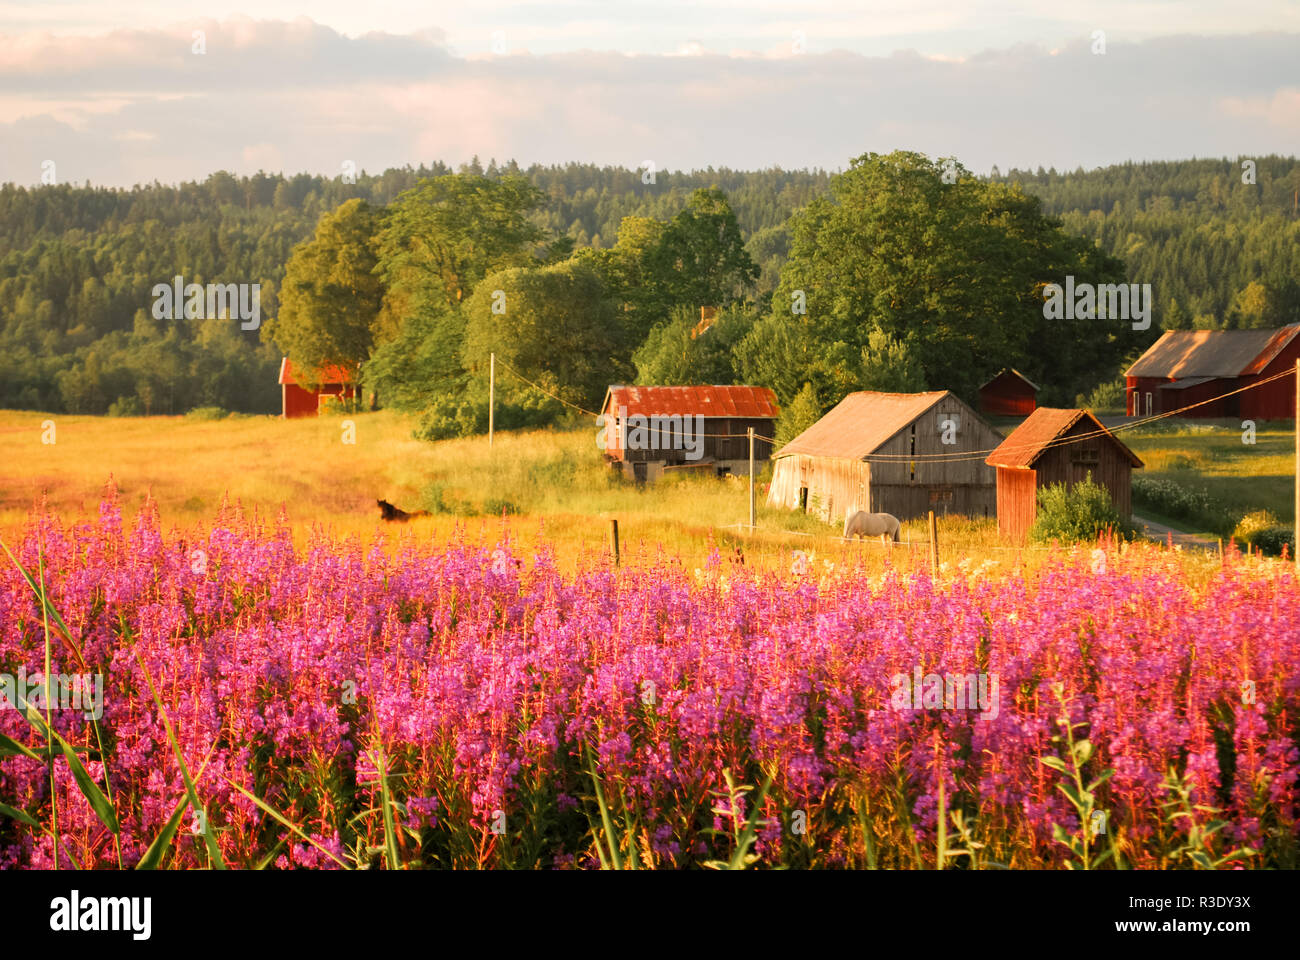 Pink flowers and traditional houses and barns by the swedish countryside in Dalsland, Sweden Stock Photo